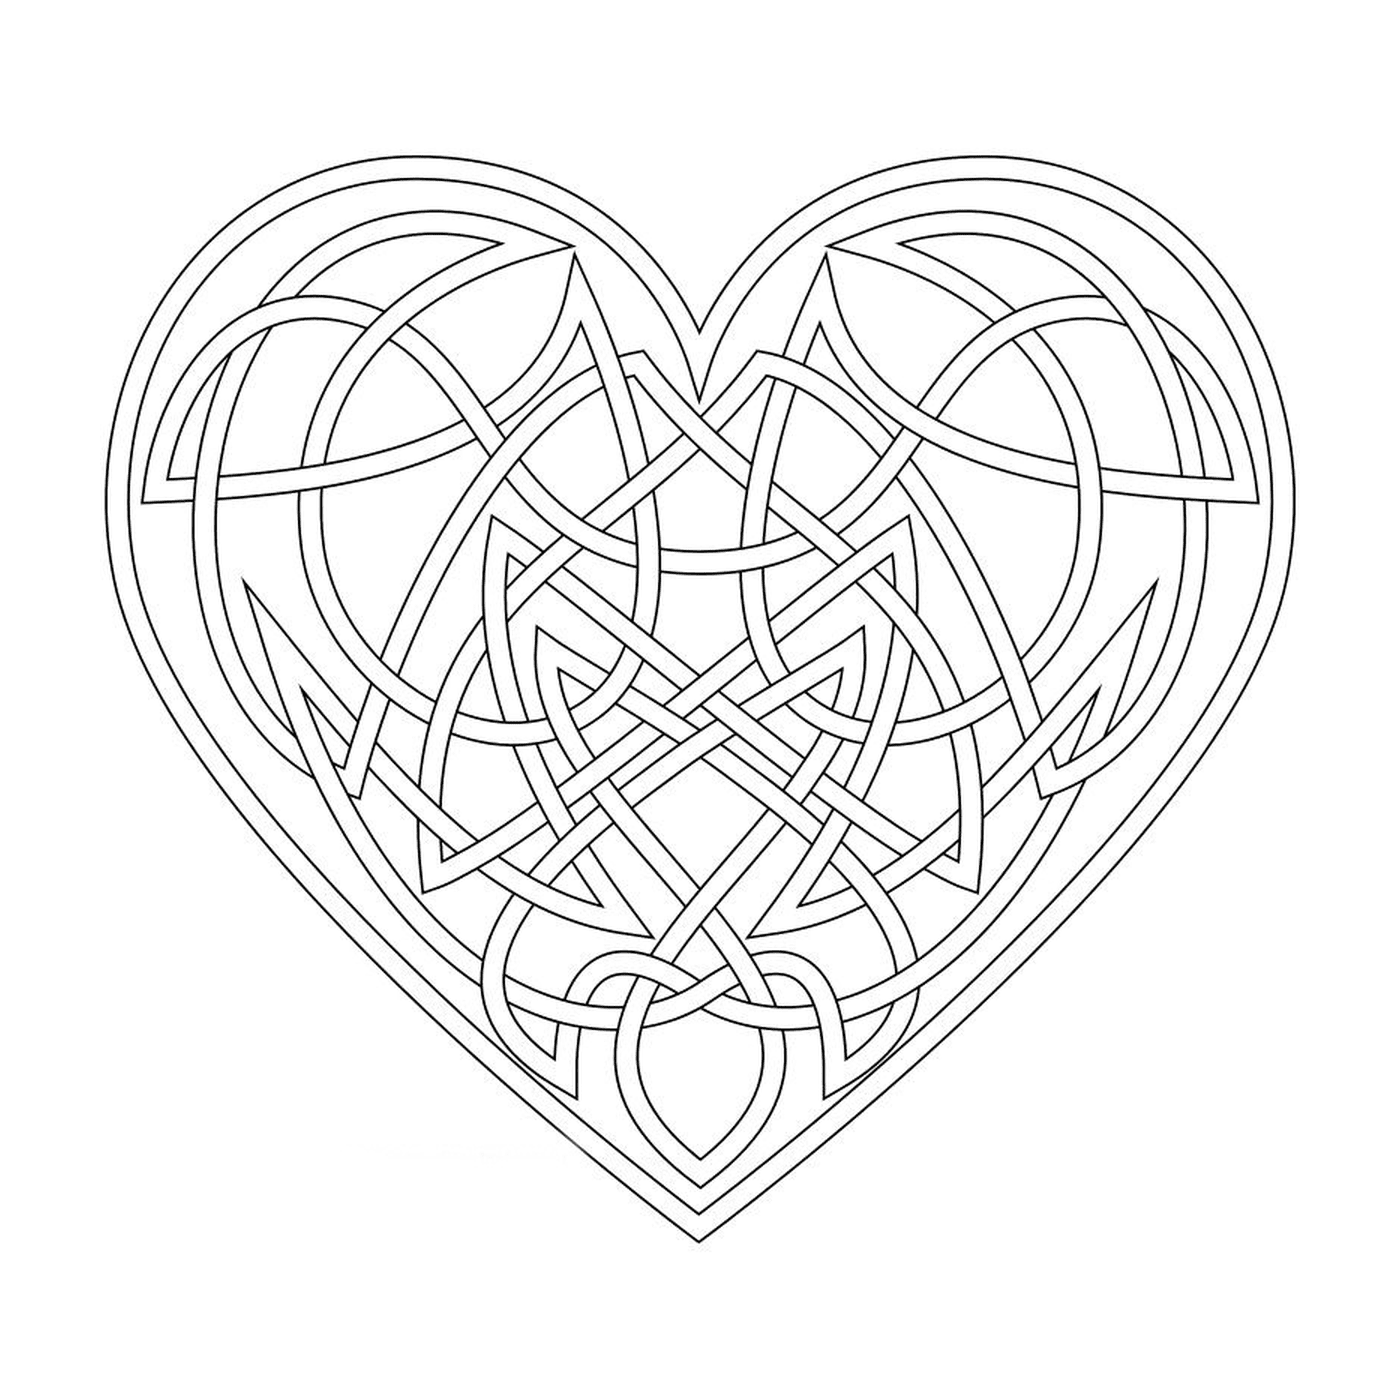  Complex heart with floral drawings 